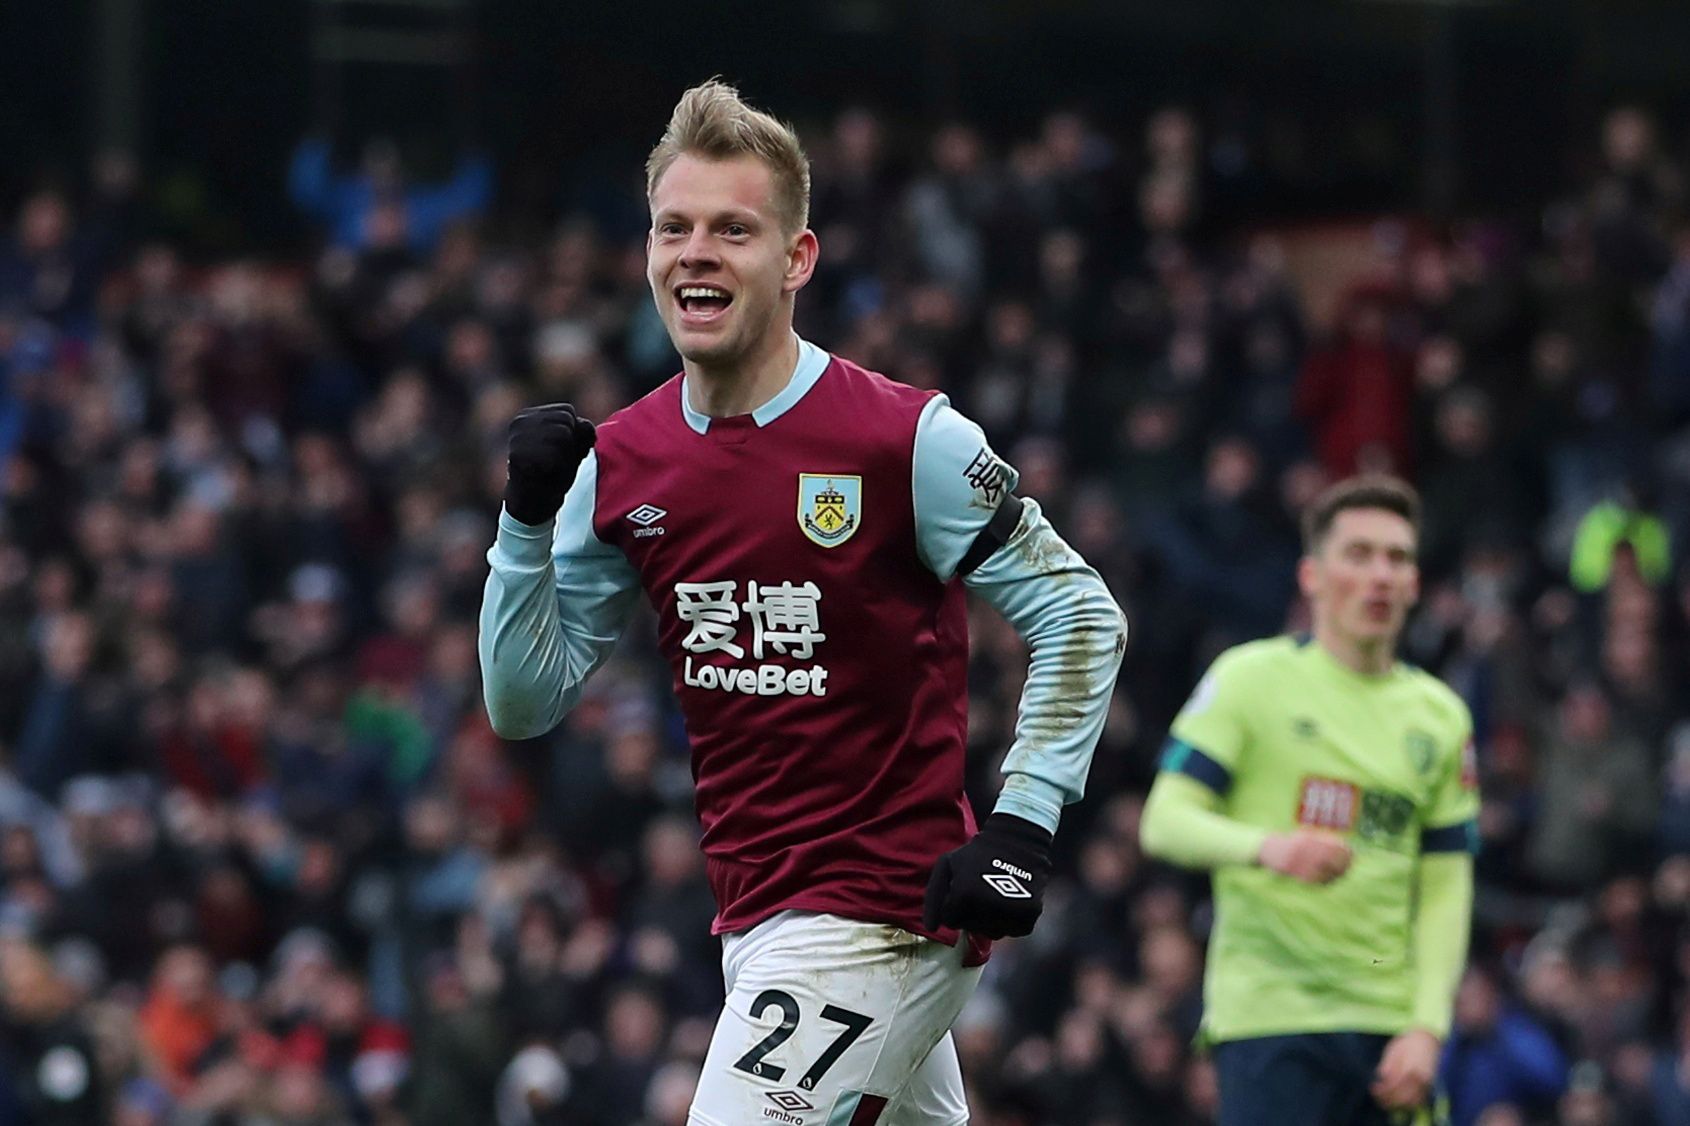 Soccer Football - Premier League - Burnley v AFC Bournemouth - Turf Moor, Burnley, Britain - February 22, 2020  Burnley's Matej Vydra celebrates scoring their first goal  Action Images via Reuters/Molly Darlington  EDITORIAL USE ONLY. No use with unauthorized audio, video, data, fixture lists, club/league logos or 